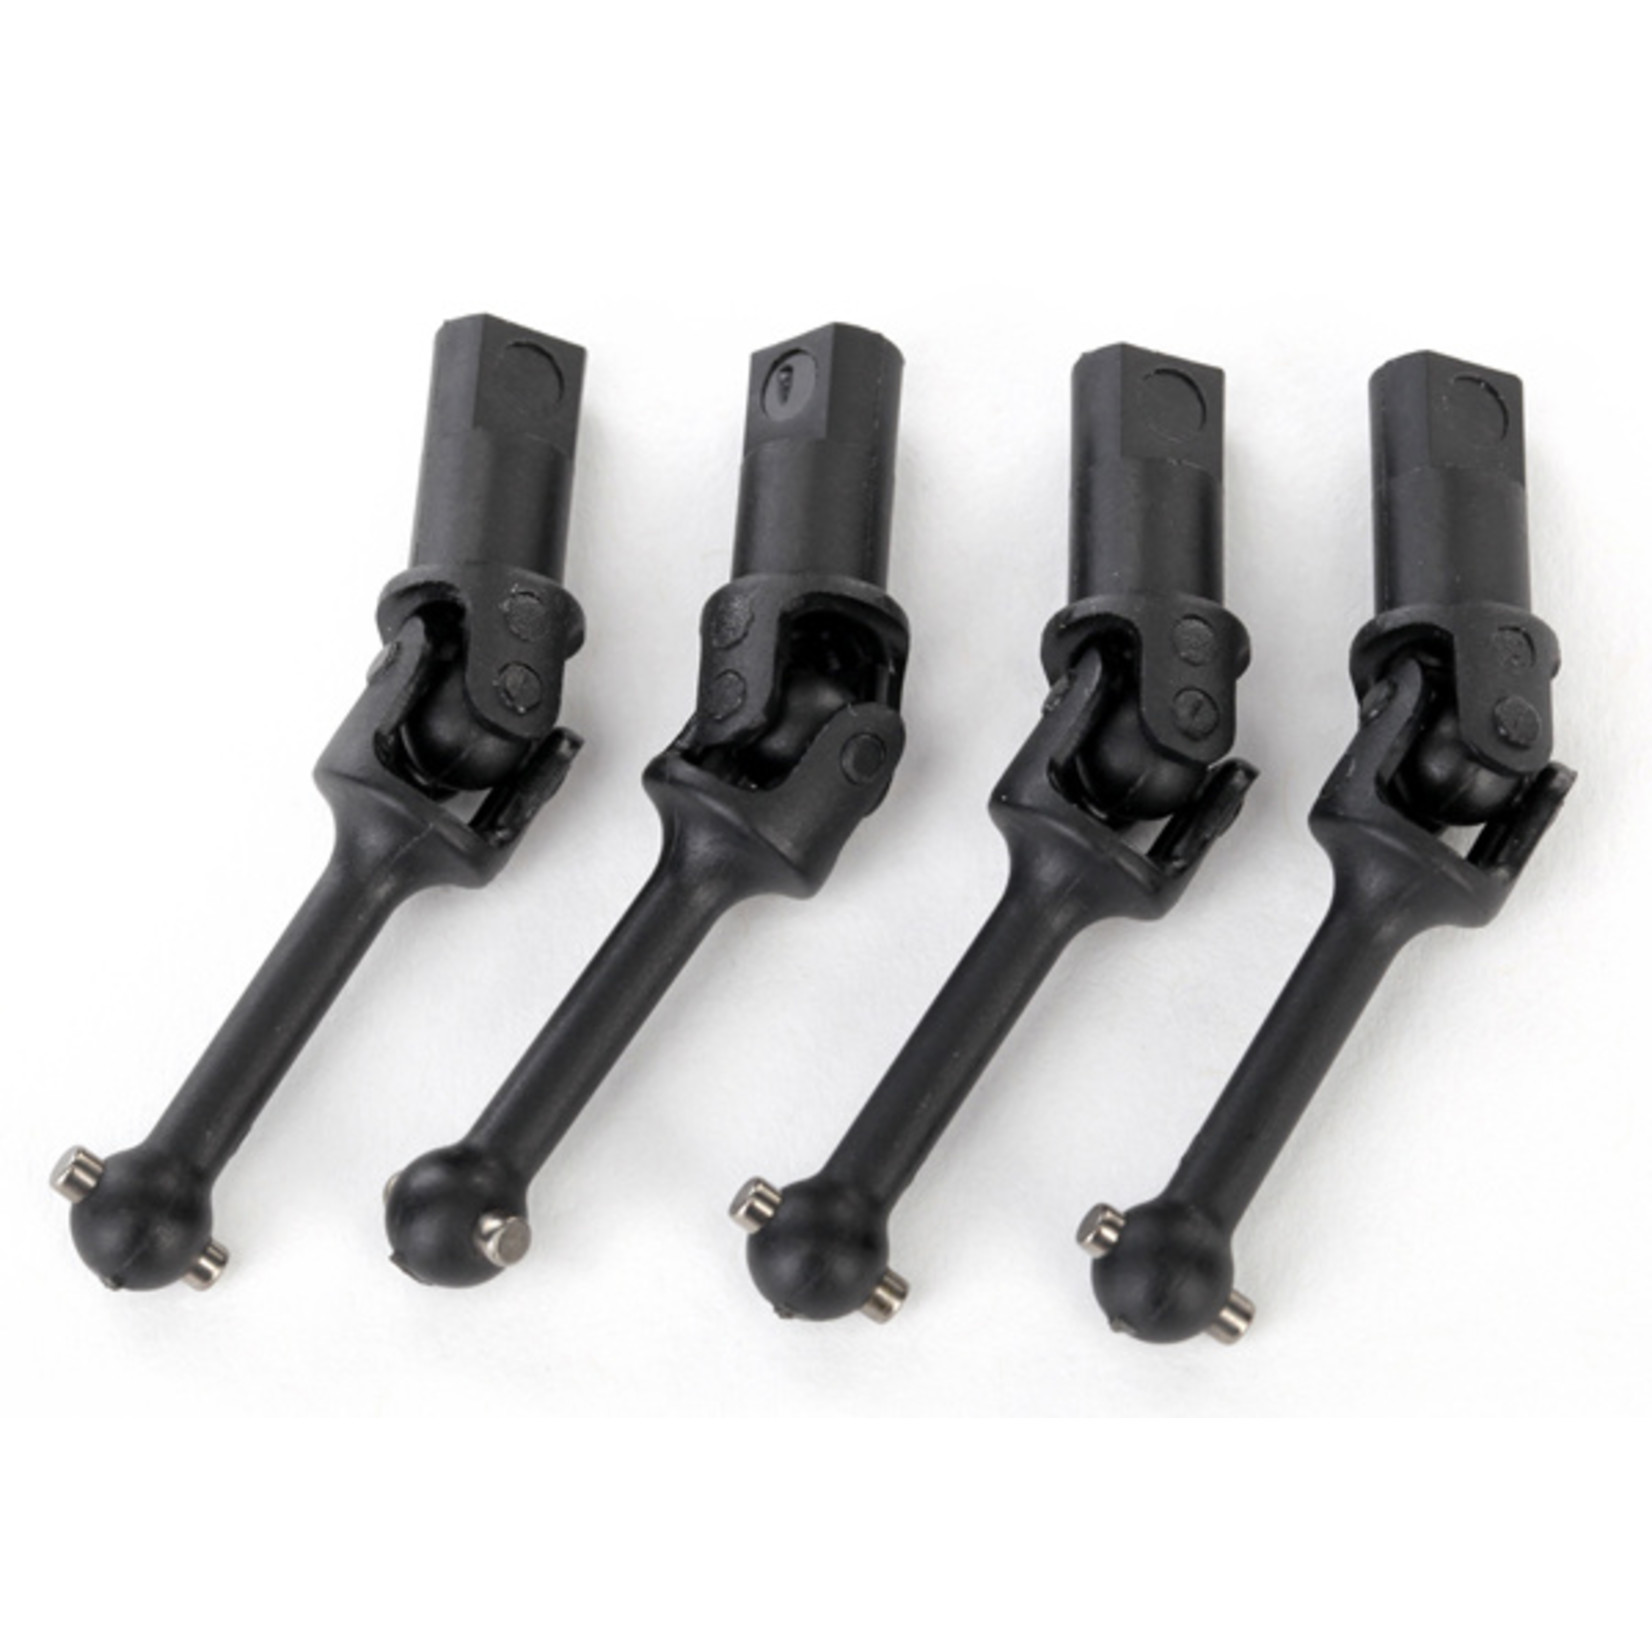 Traxxas 7550 - Driveshaft assembly, front & rear (4)